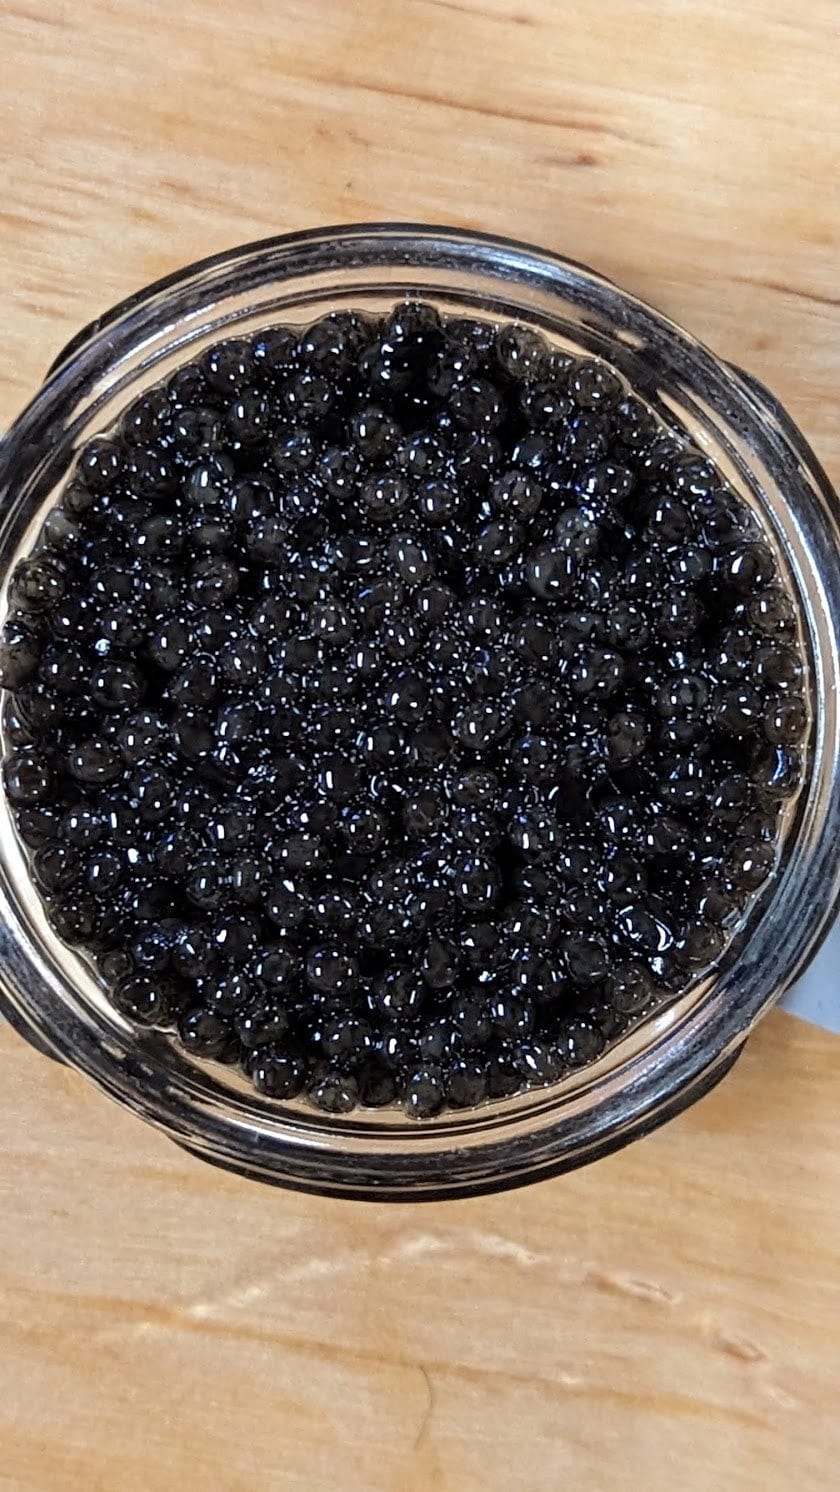 What is Caviar? Premium Caviar & Free 1-Day Shipping